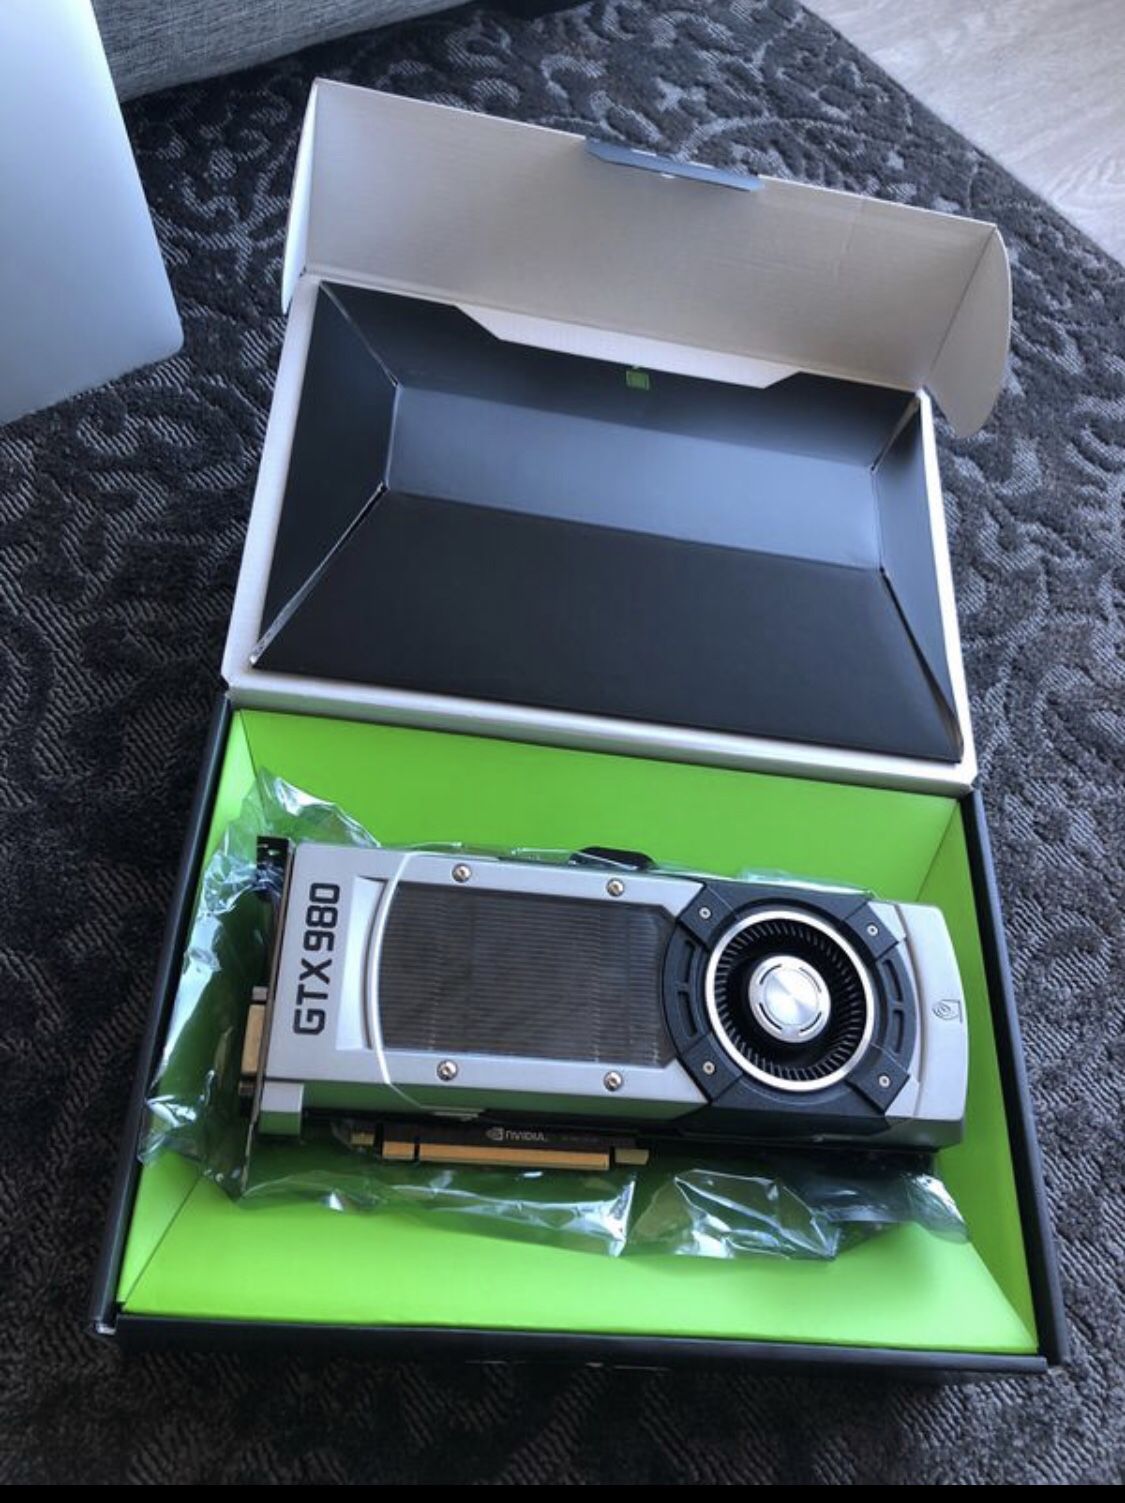 NVidia GTX 980 - 4GB - Graphics Video Card - Reference Model